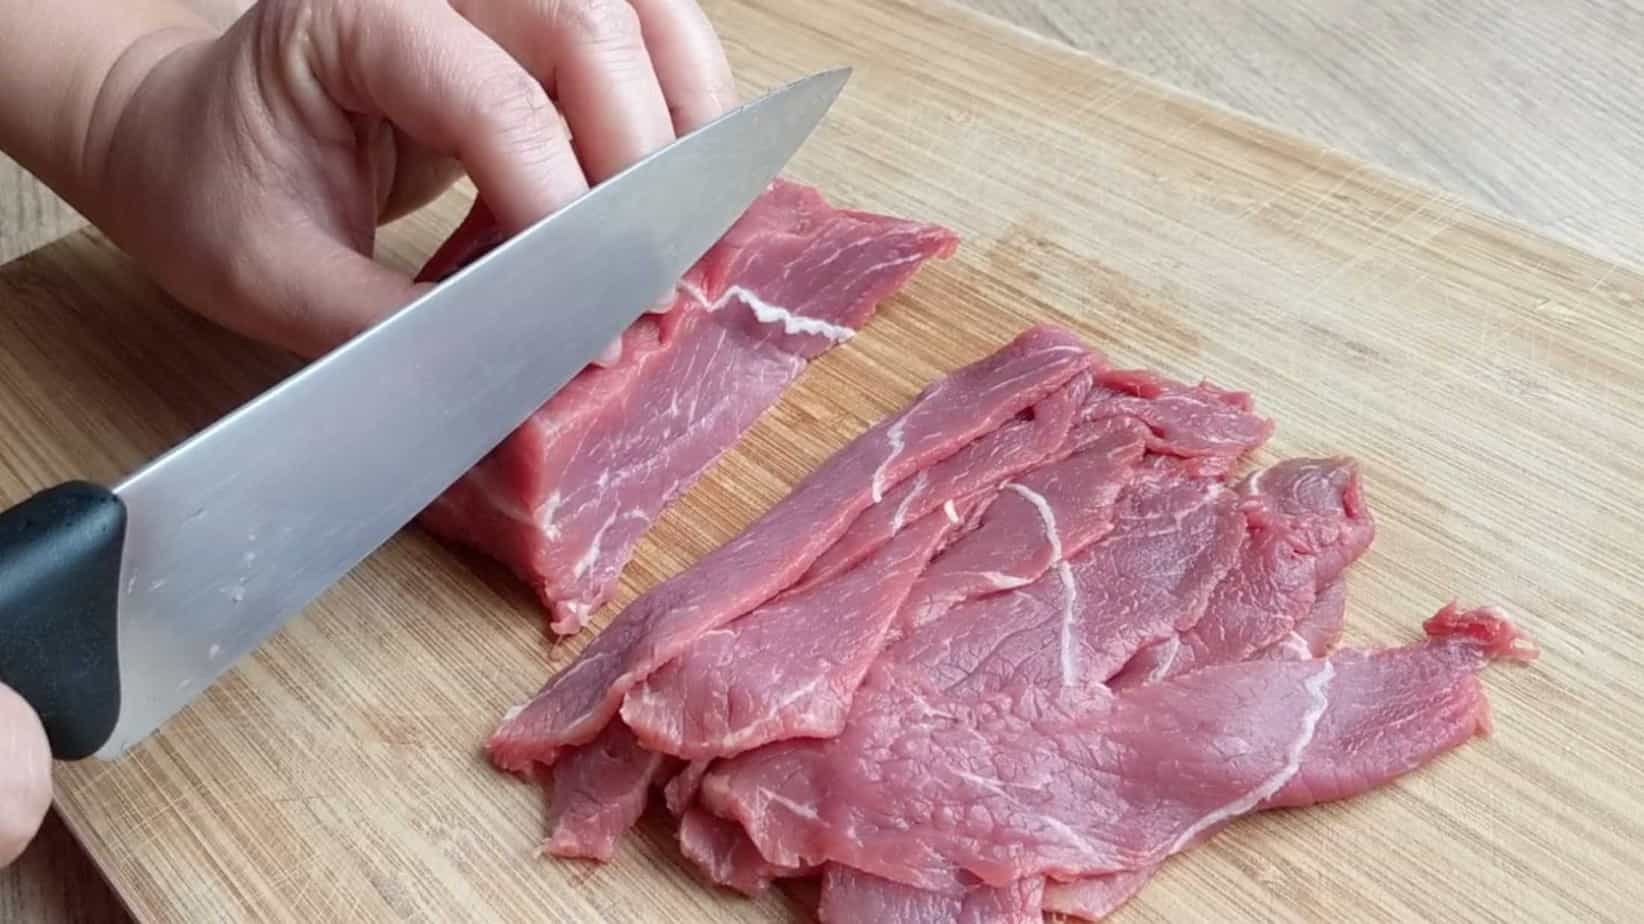 Beef being sliced